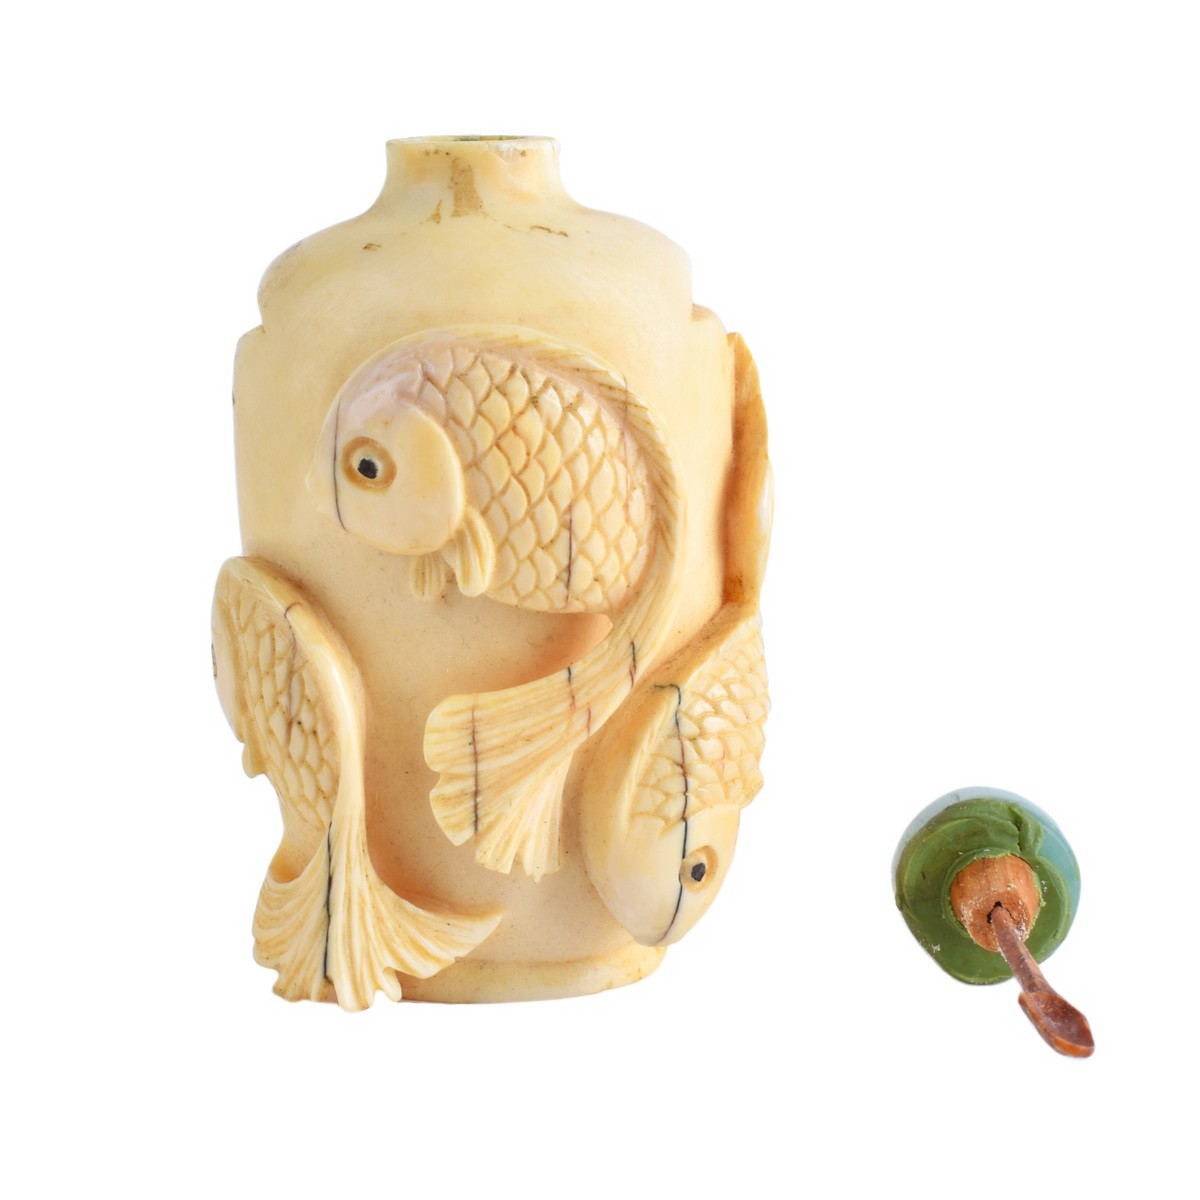 19th Century Chinese Carved Ivory Snuff Bottle